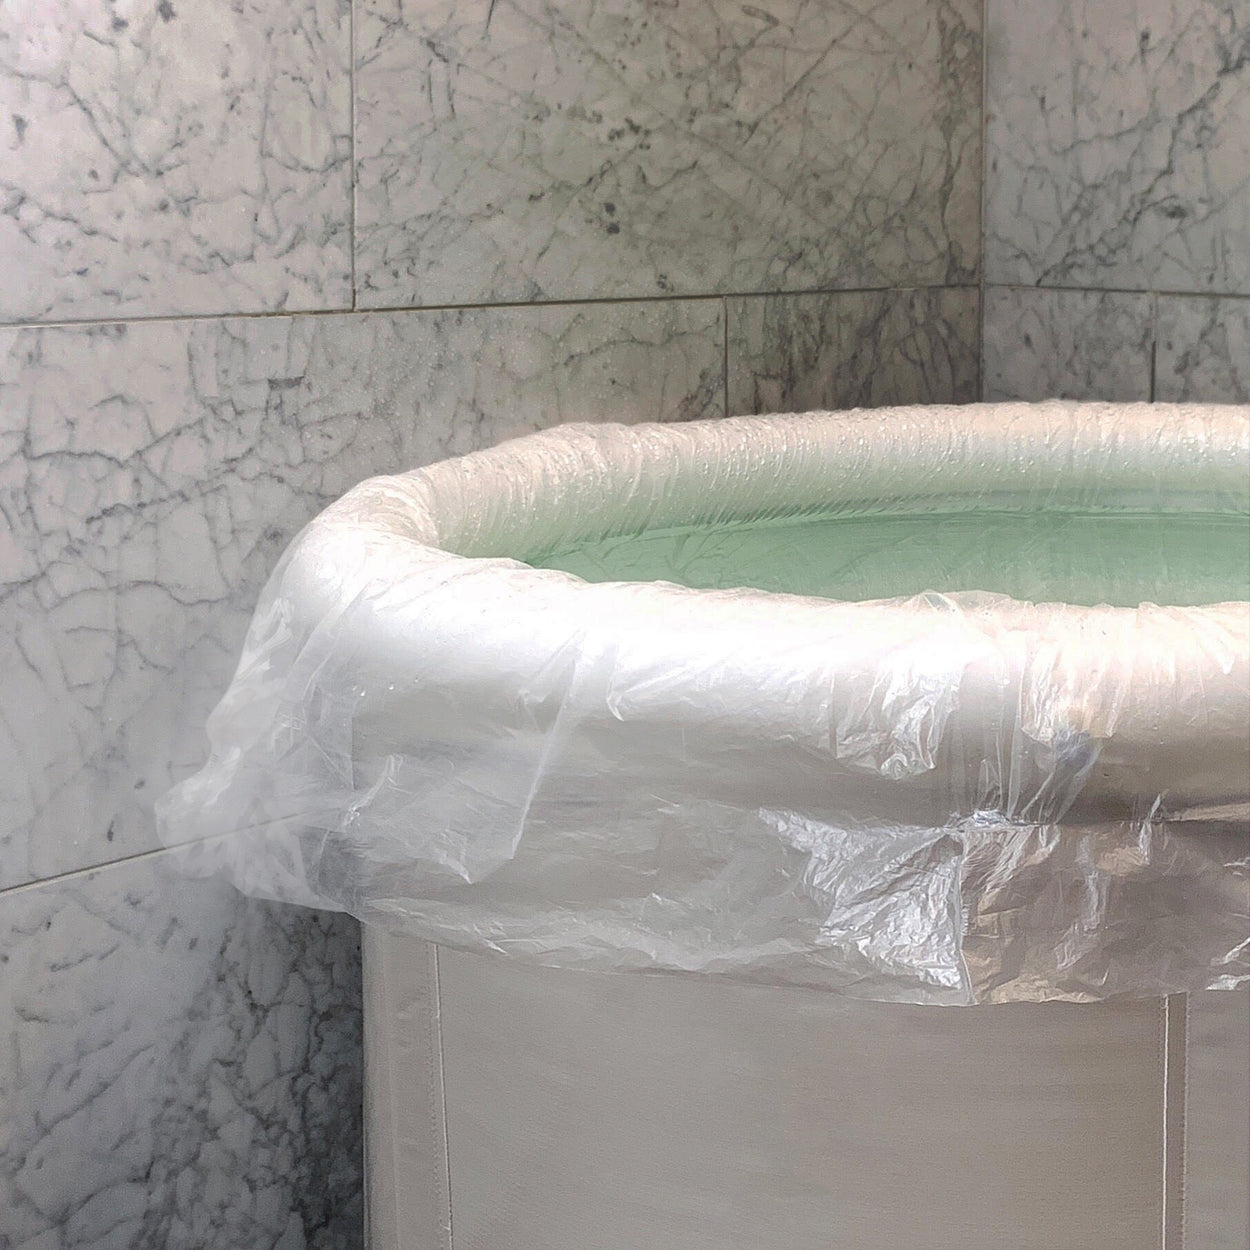 Outstanding Benefits of the Mysterious Bathtub Liner